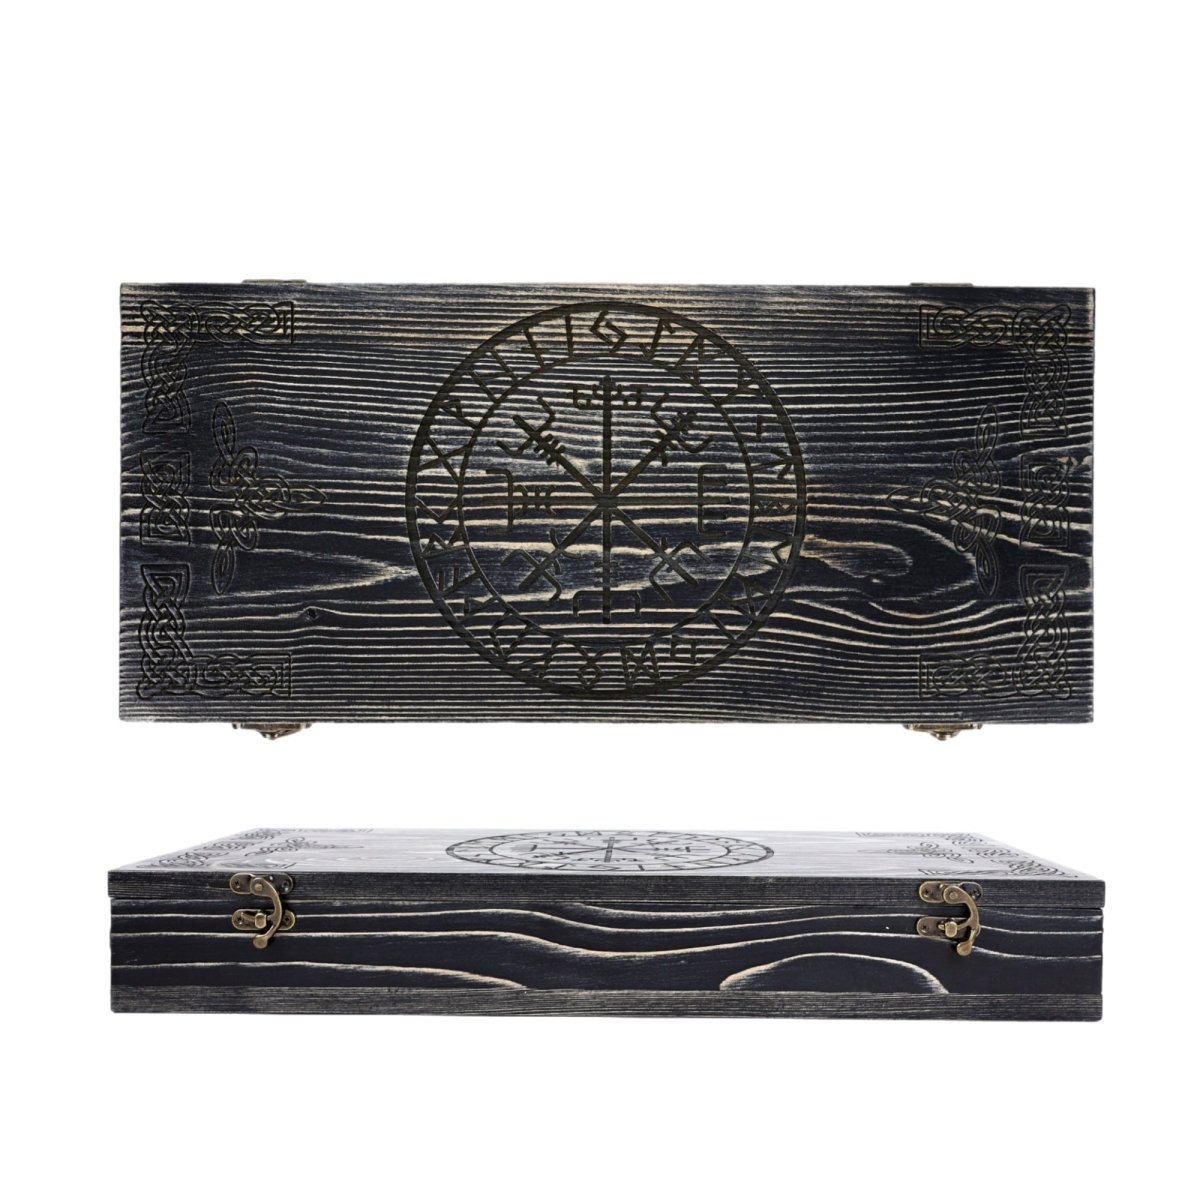 Runic wooden box for medium axe from AncientSmithy